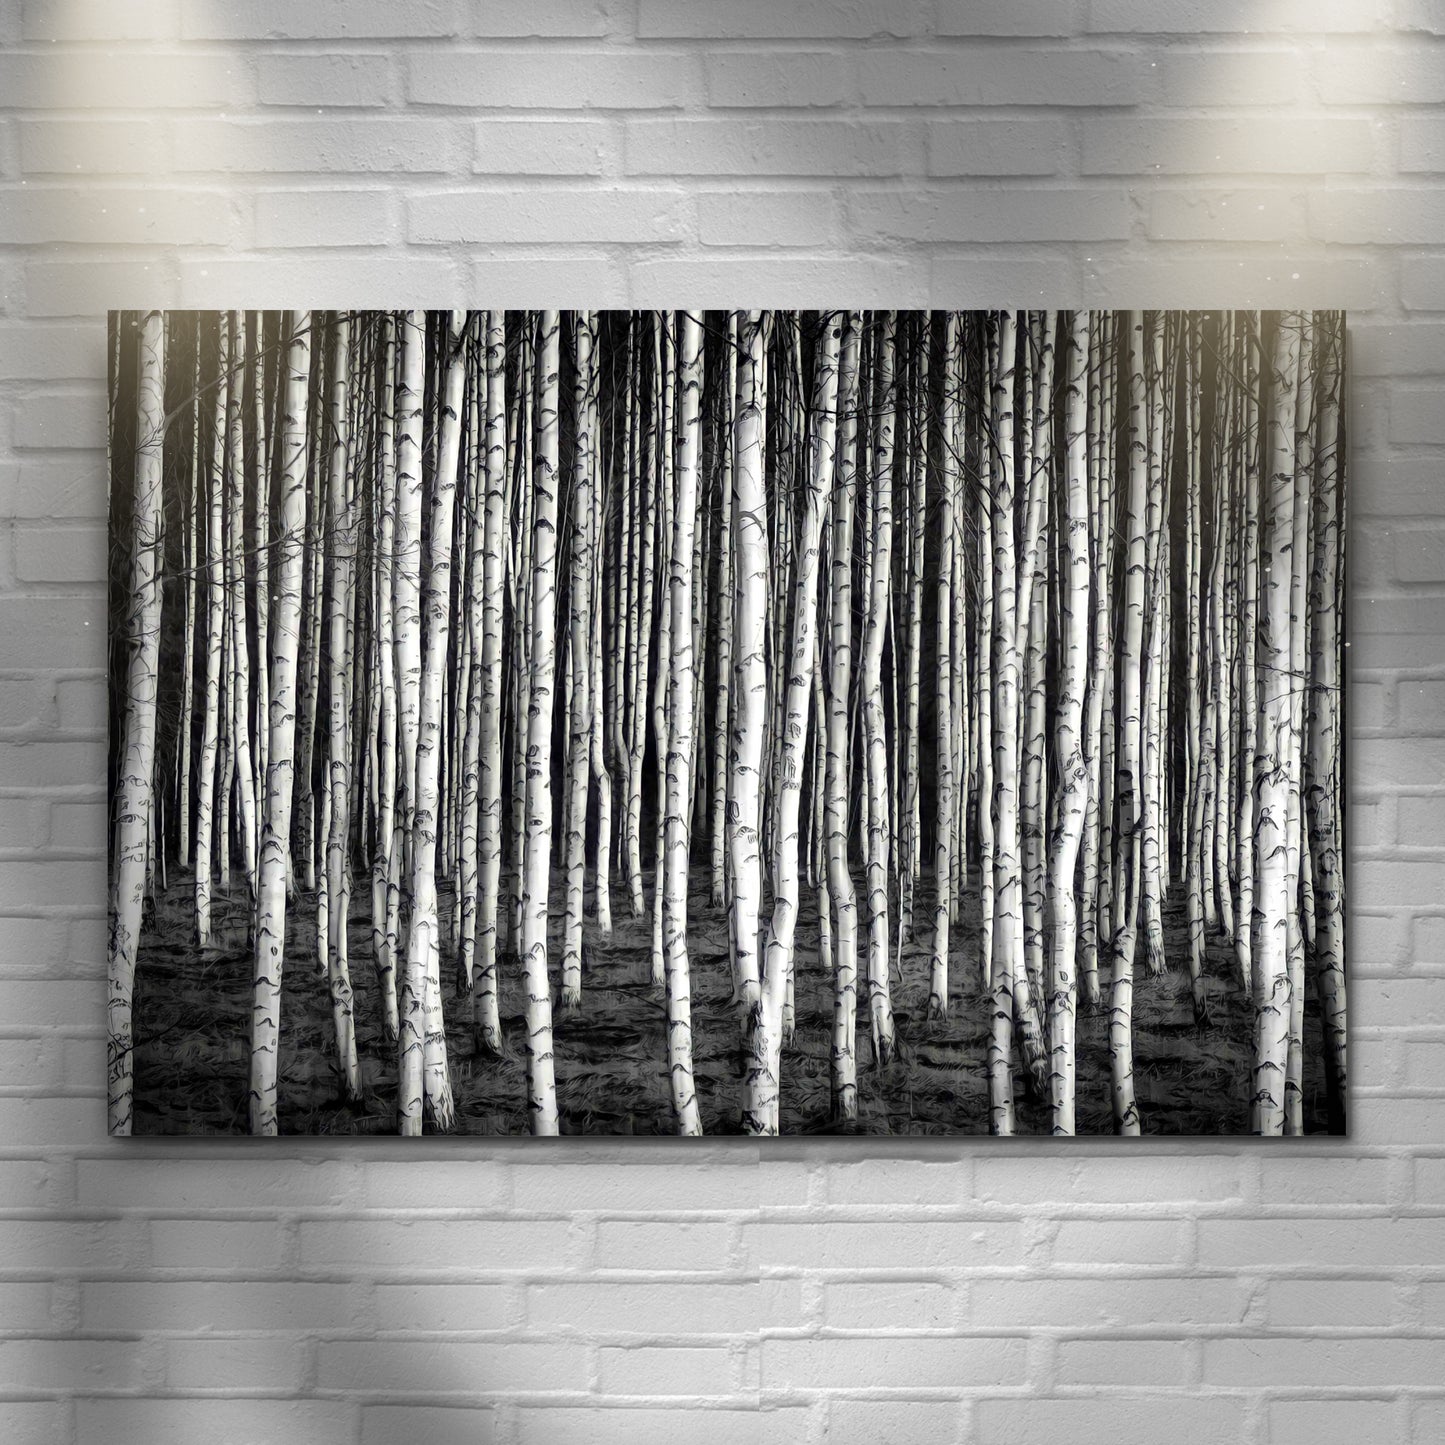 Monochrome Birch Trees Canvas Wall Art - Image by Tailored Canvases